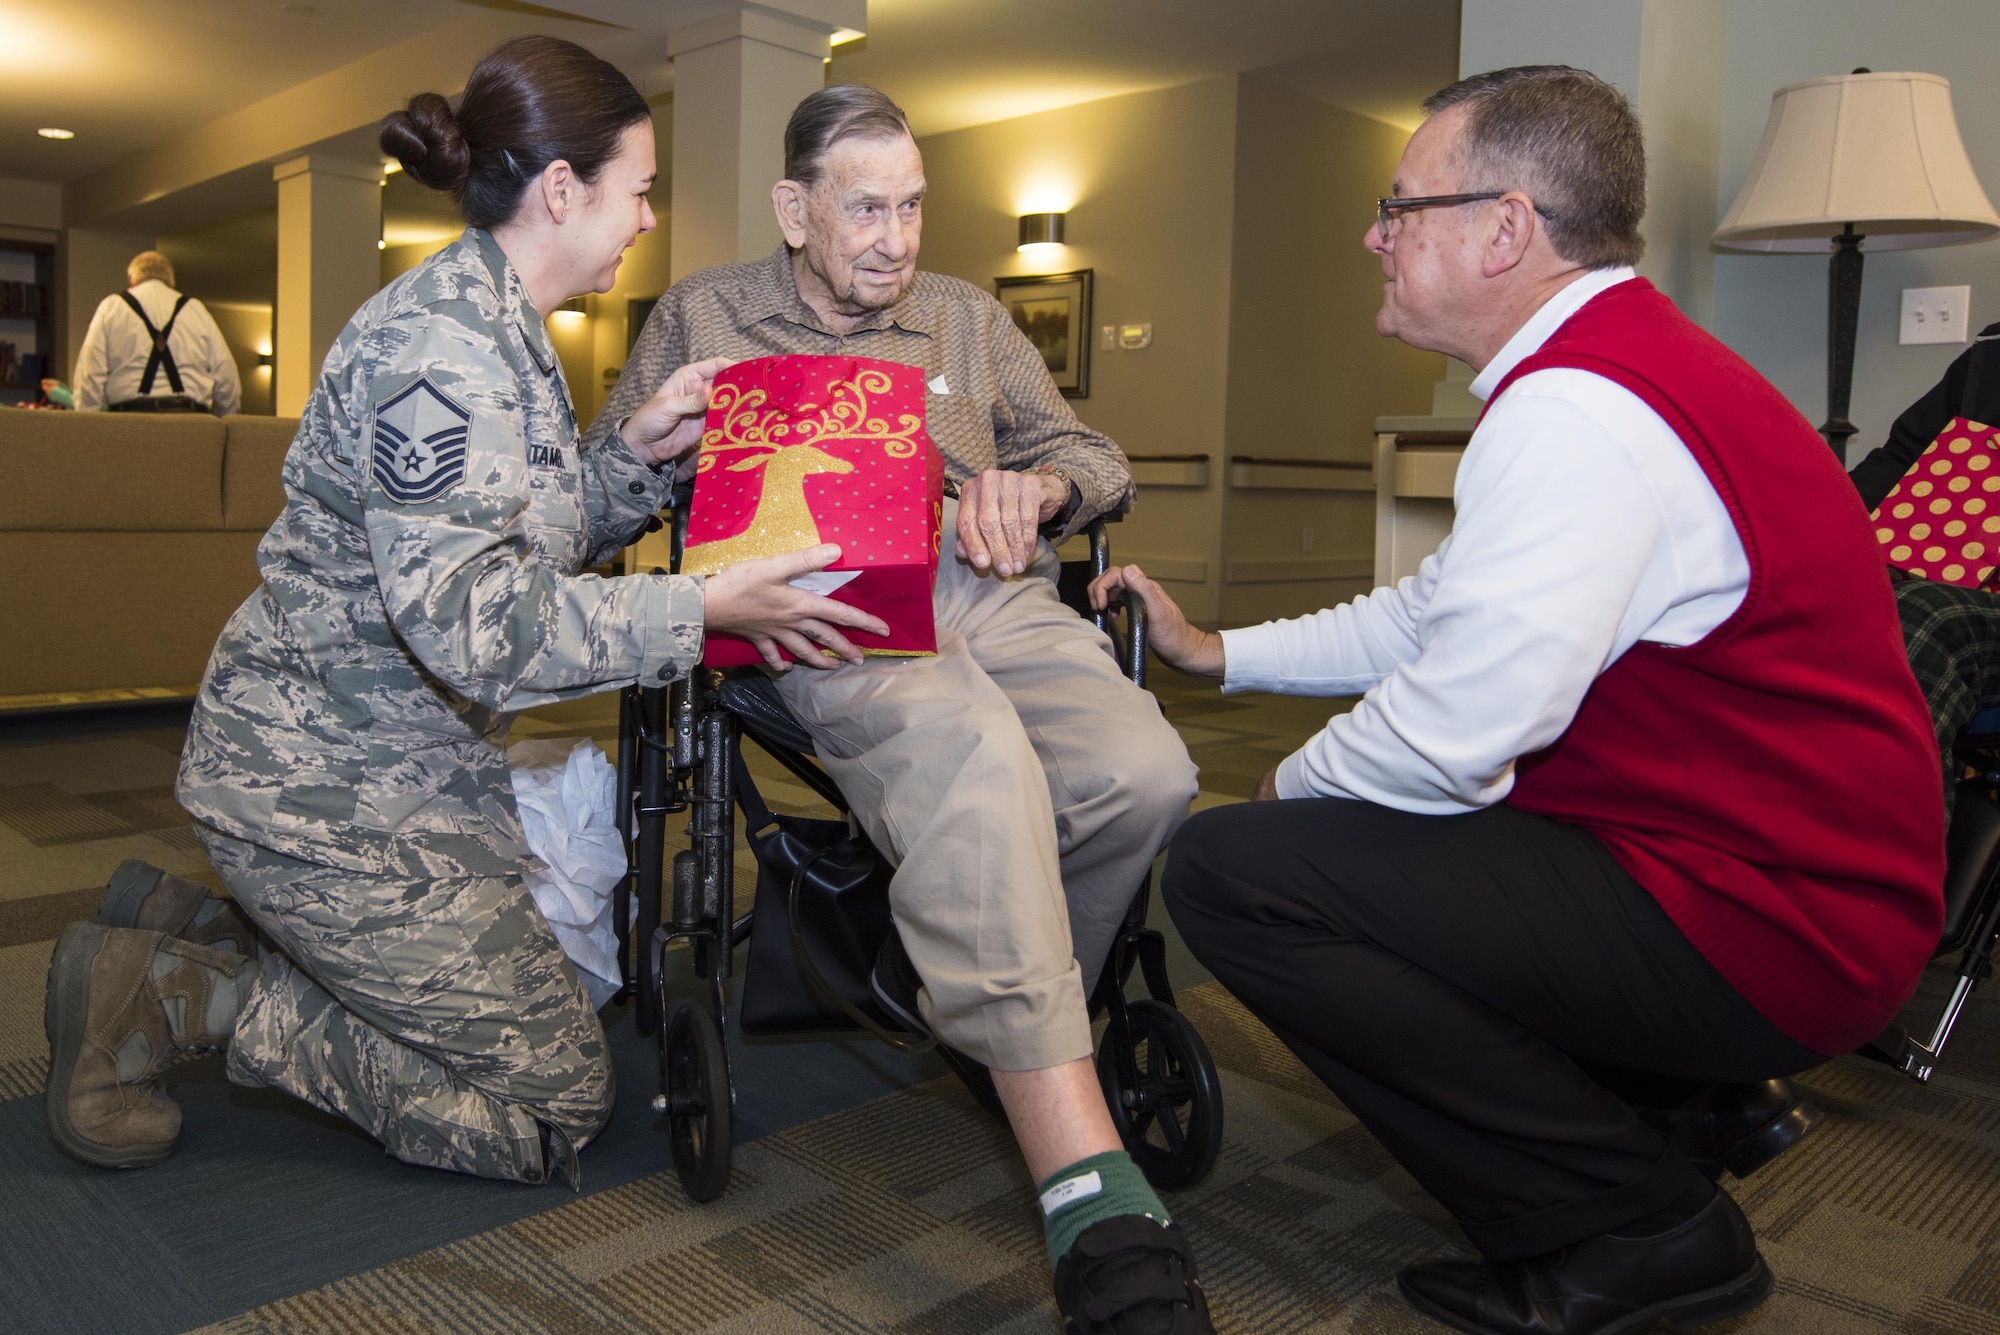 Master Sgt. Jennifer Tamble (left), 4th Equipment Maintenance Squadron NCO in-charge of munitions control, and Doug McGrath (right), Goldsboro Elks Lodge #139 chairman of the veterans committee, visit with a veteran and resident of the North Carolina State Veterans Home, Dec. 24, 2016, in Kinston, North Carolina. More than 90 residents received goody bags and holiday cards from volunteers. (U.S. Air Force photo by Airman Shawna L. Keyes)